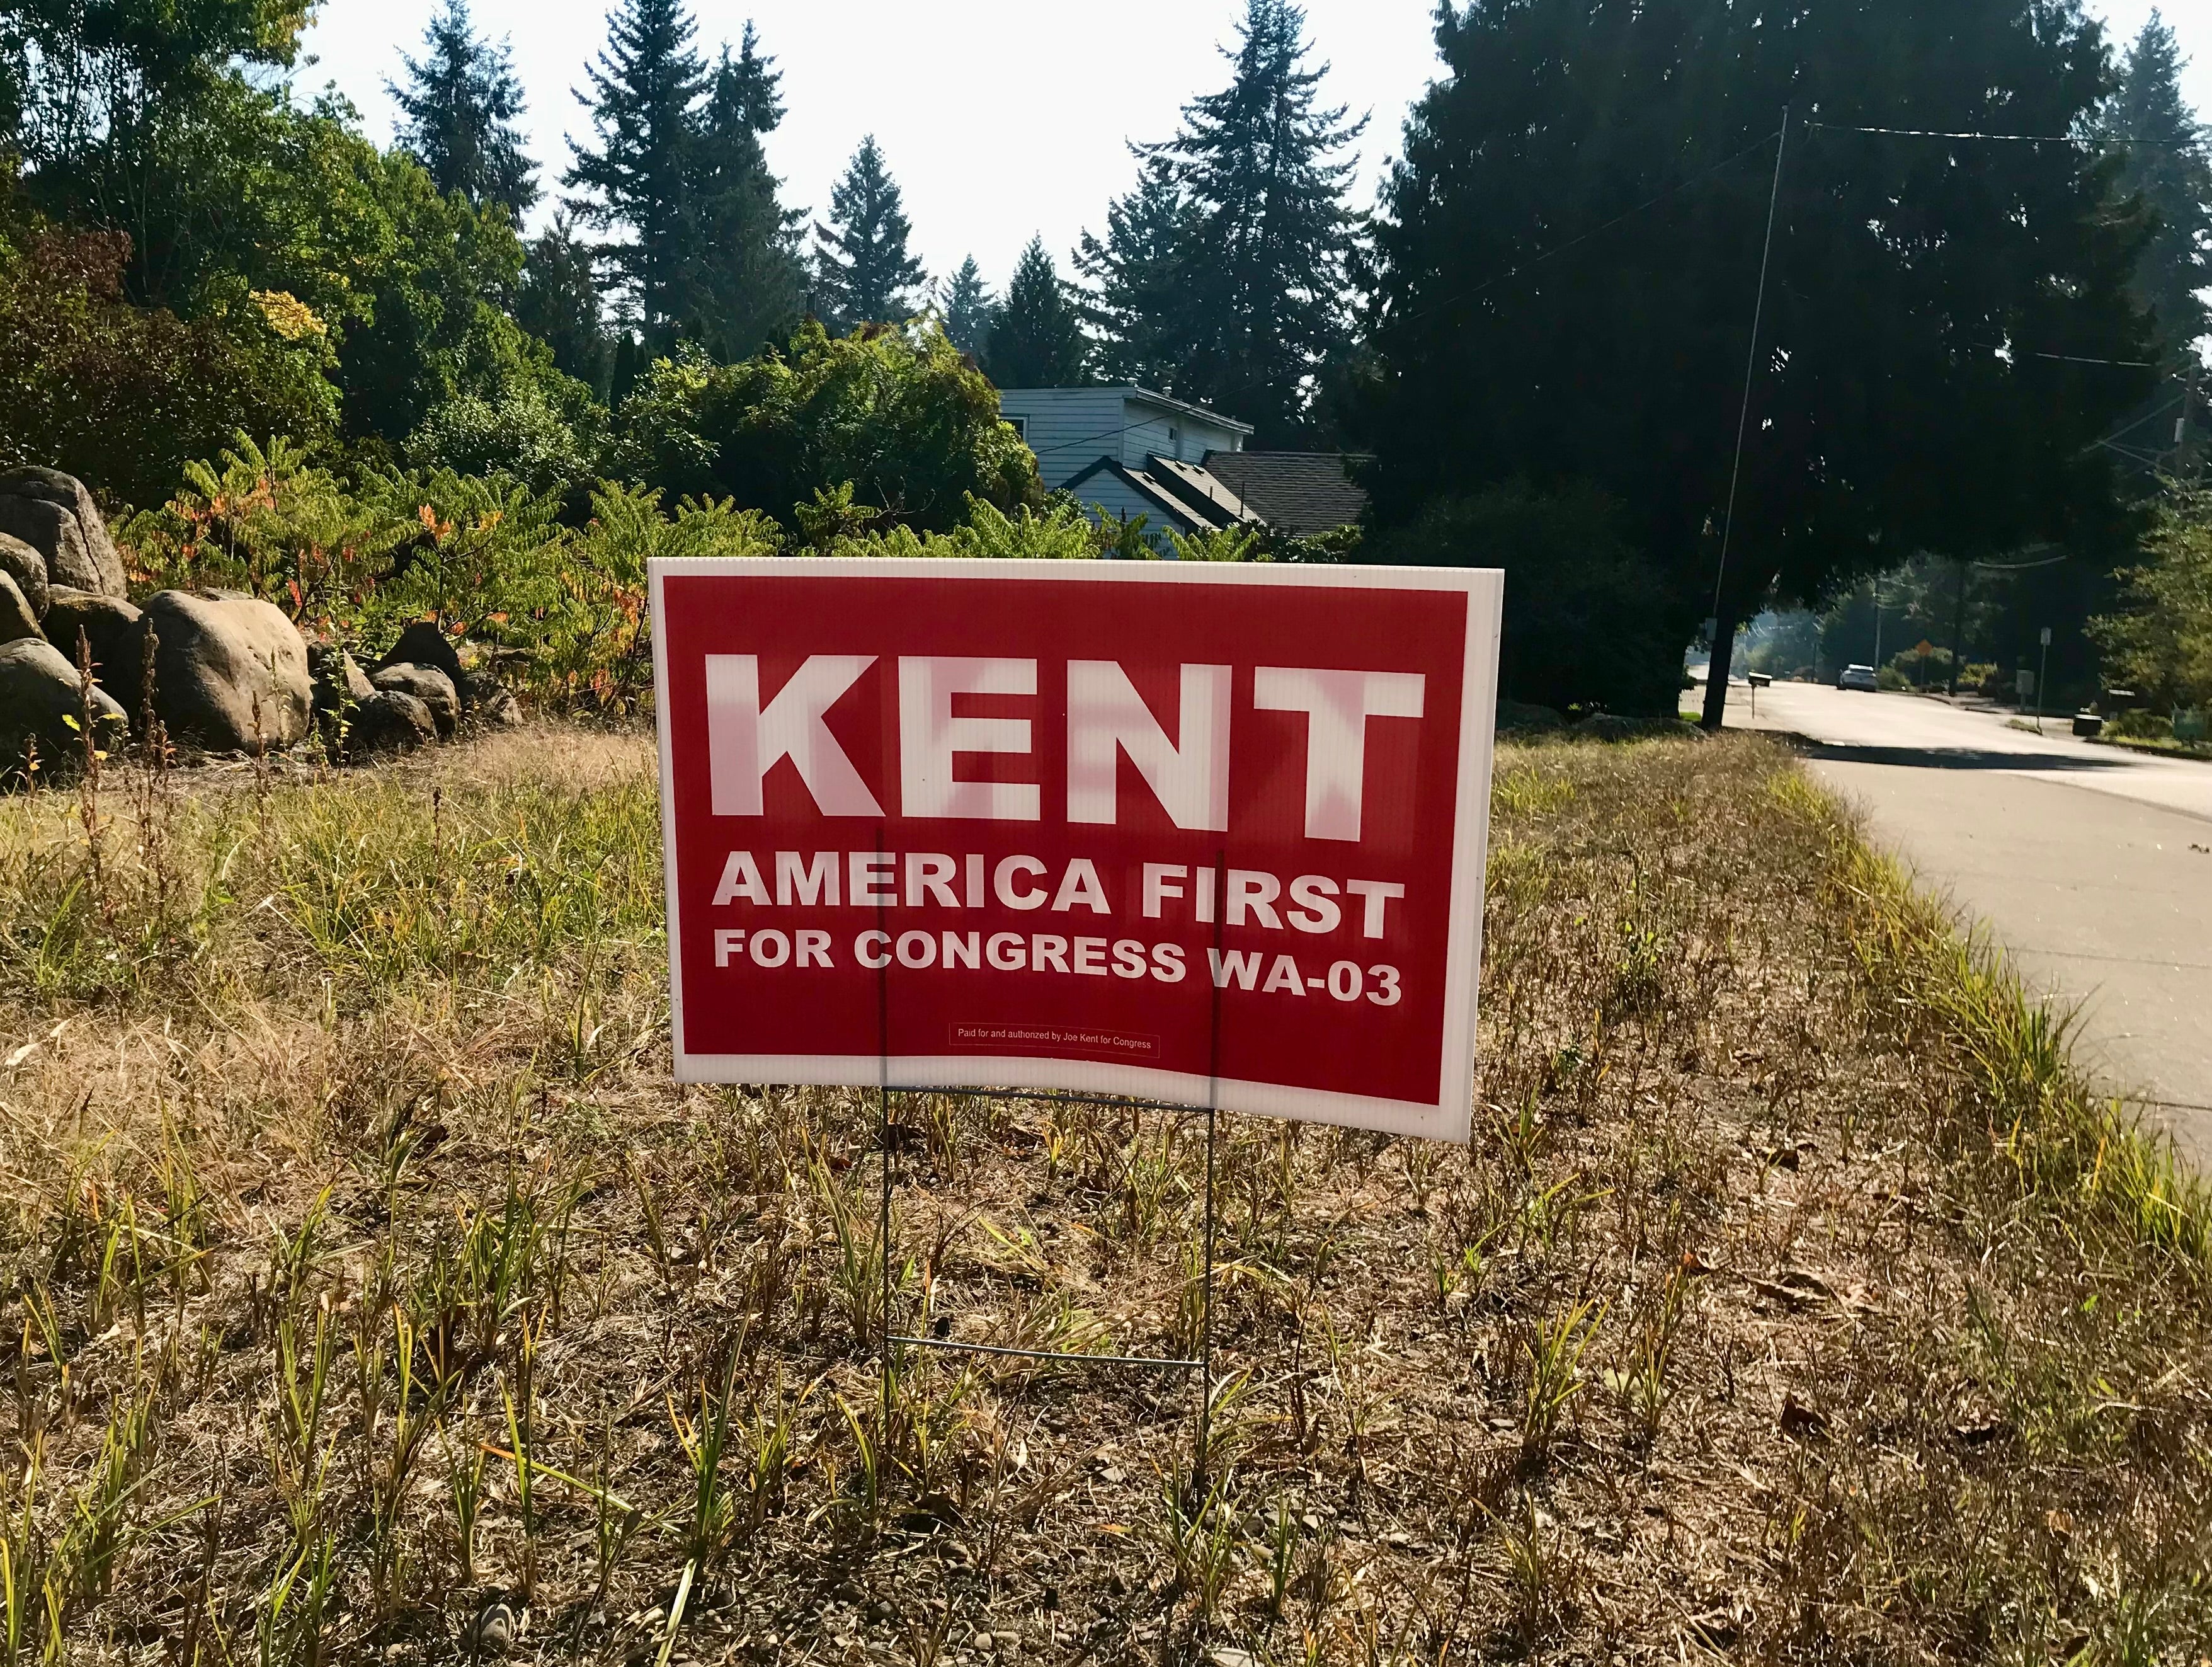 Polls suggest Joe Kent is starting with much higher name recognition than the Democrat